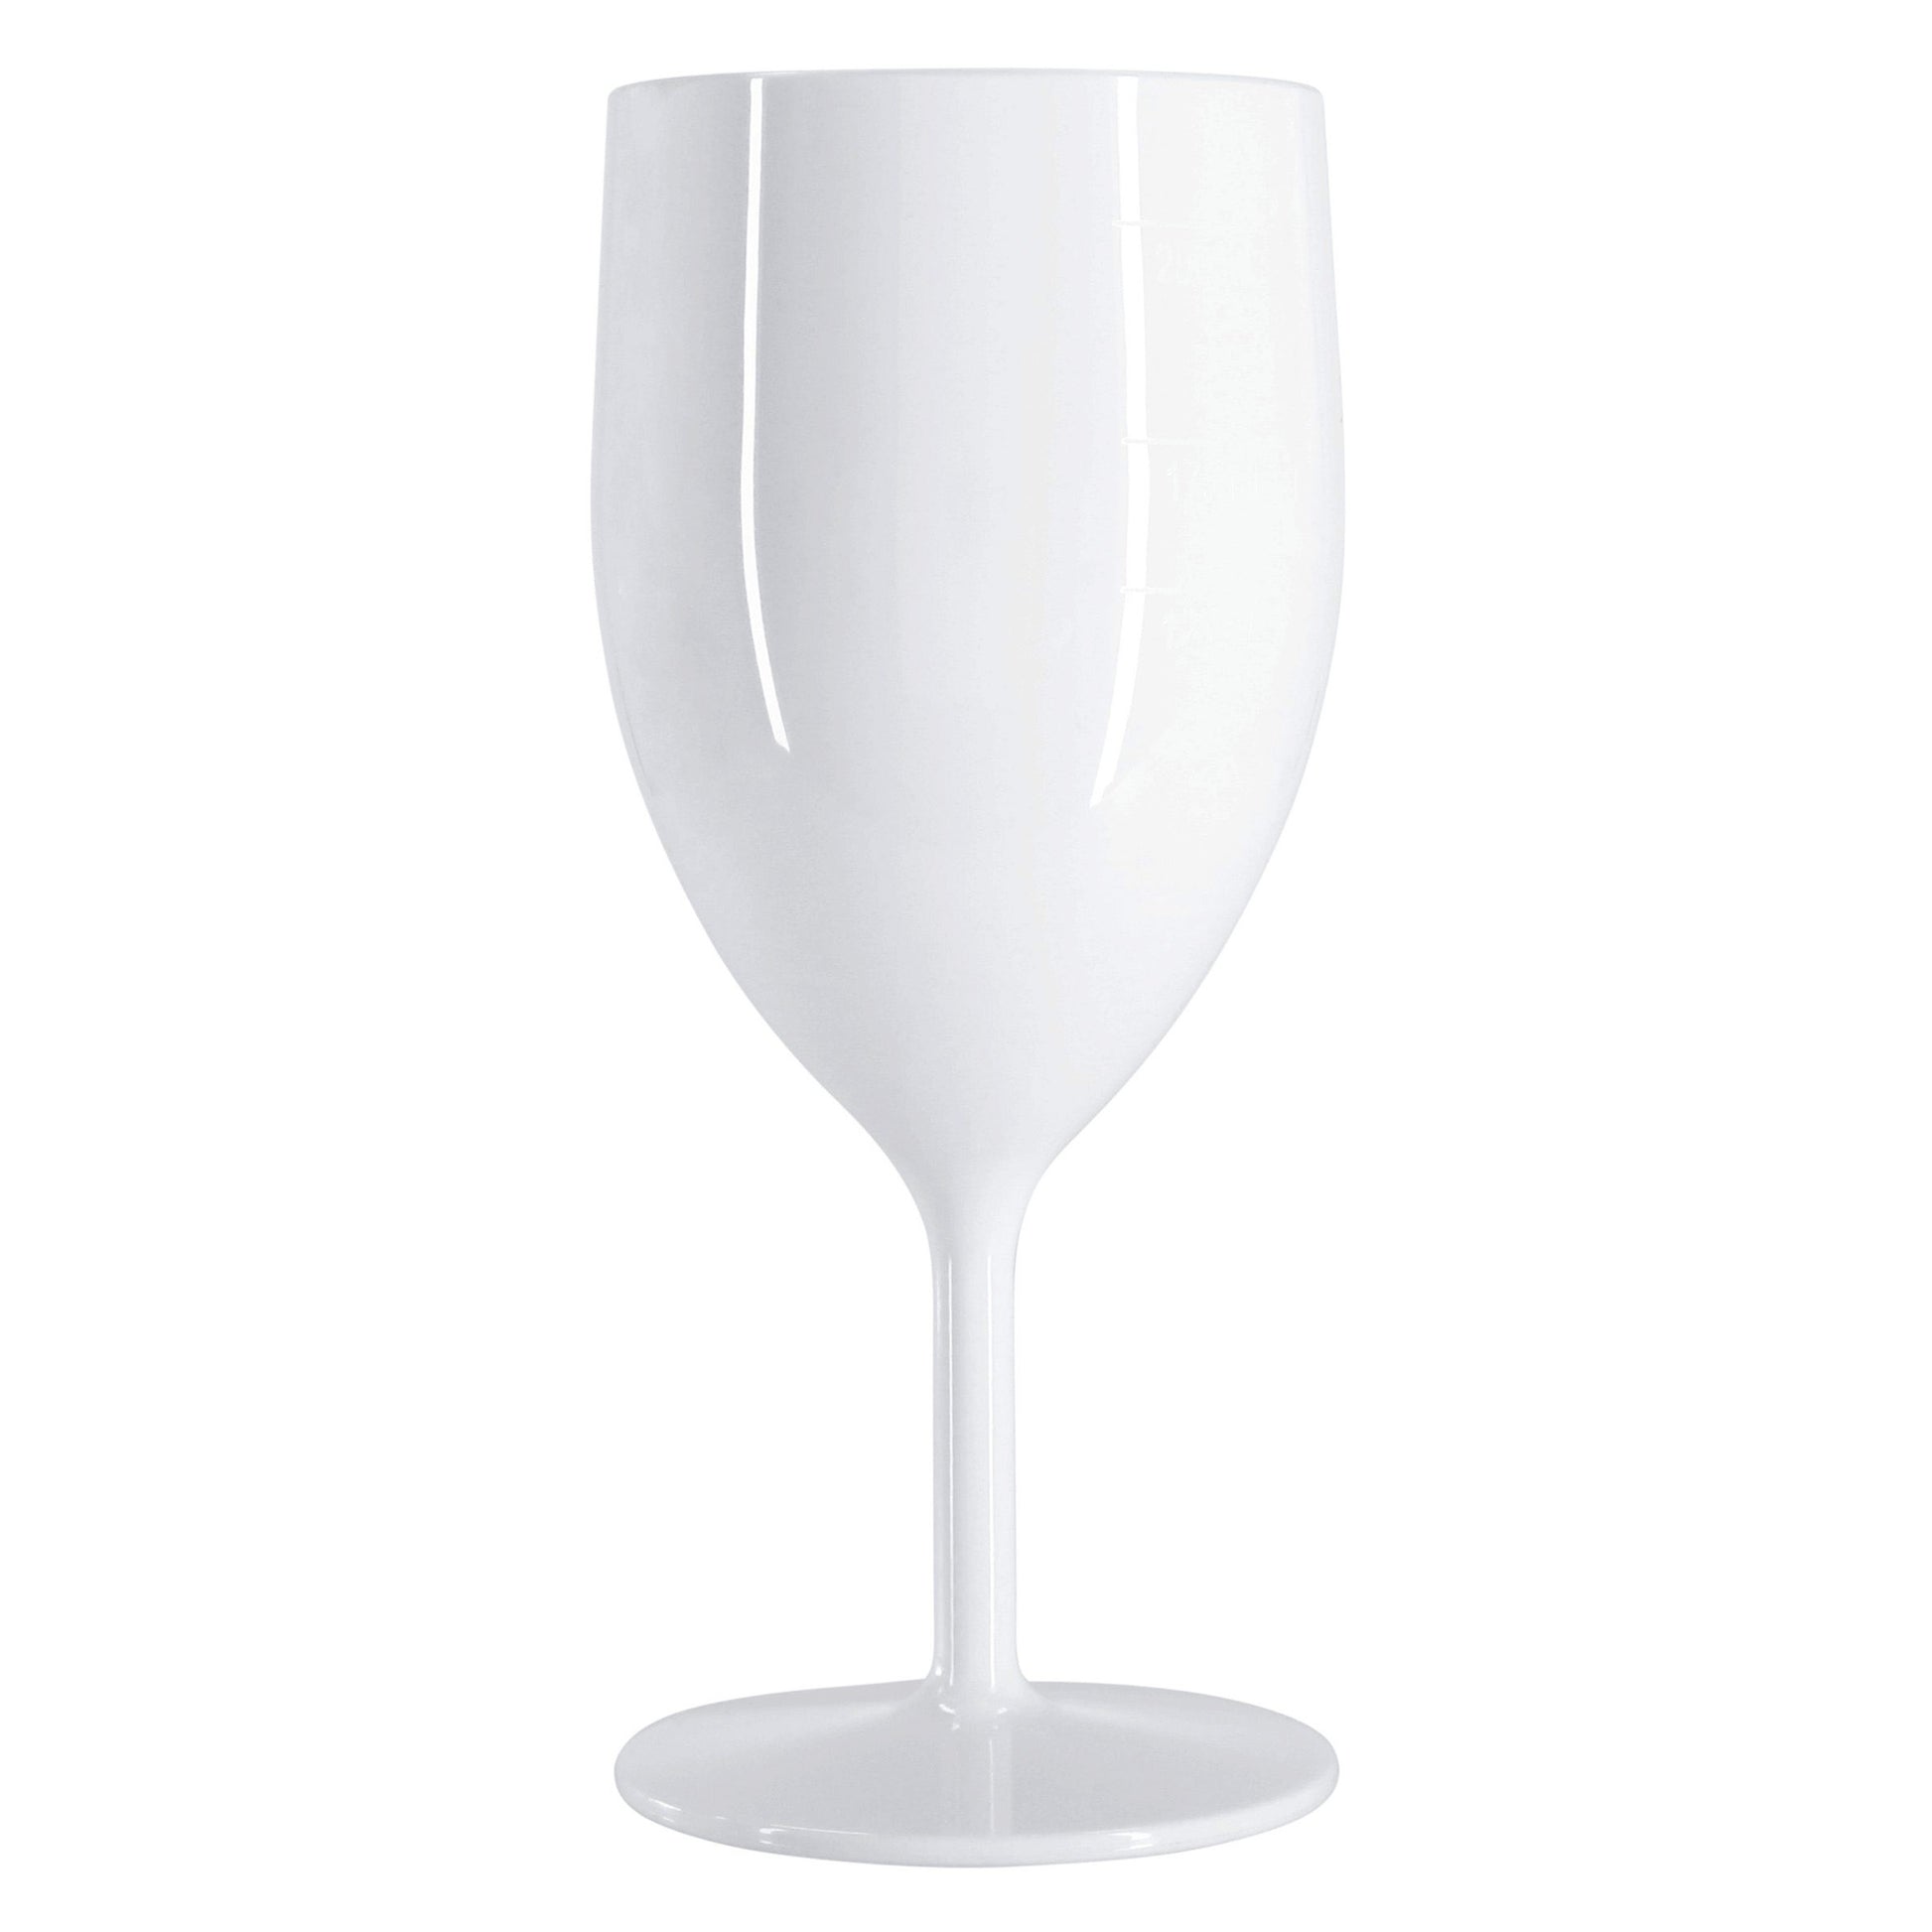 24 Flutes, 24 Wine Glasses (White) Pack of 48 Reusable Plastic Champagne Prosecco 175ml 300ml Strong Glossy Bright 1-Piece Dishwasher Safe-5056020186311-EY-PP-086-Product Pro-Flutes, White, White Champagne Glasses, White Prosecco Flutes, White Wine Glasses, Wine Glasses